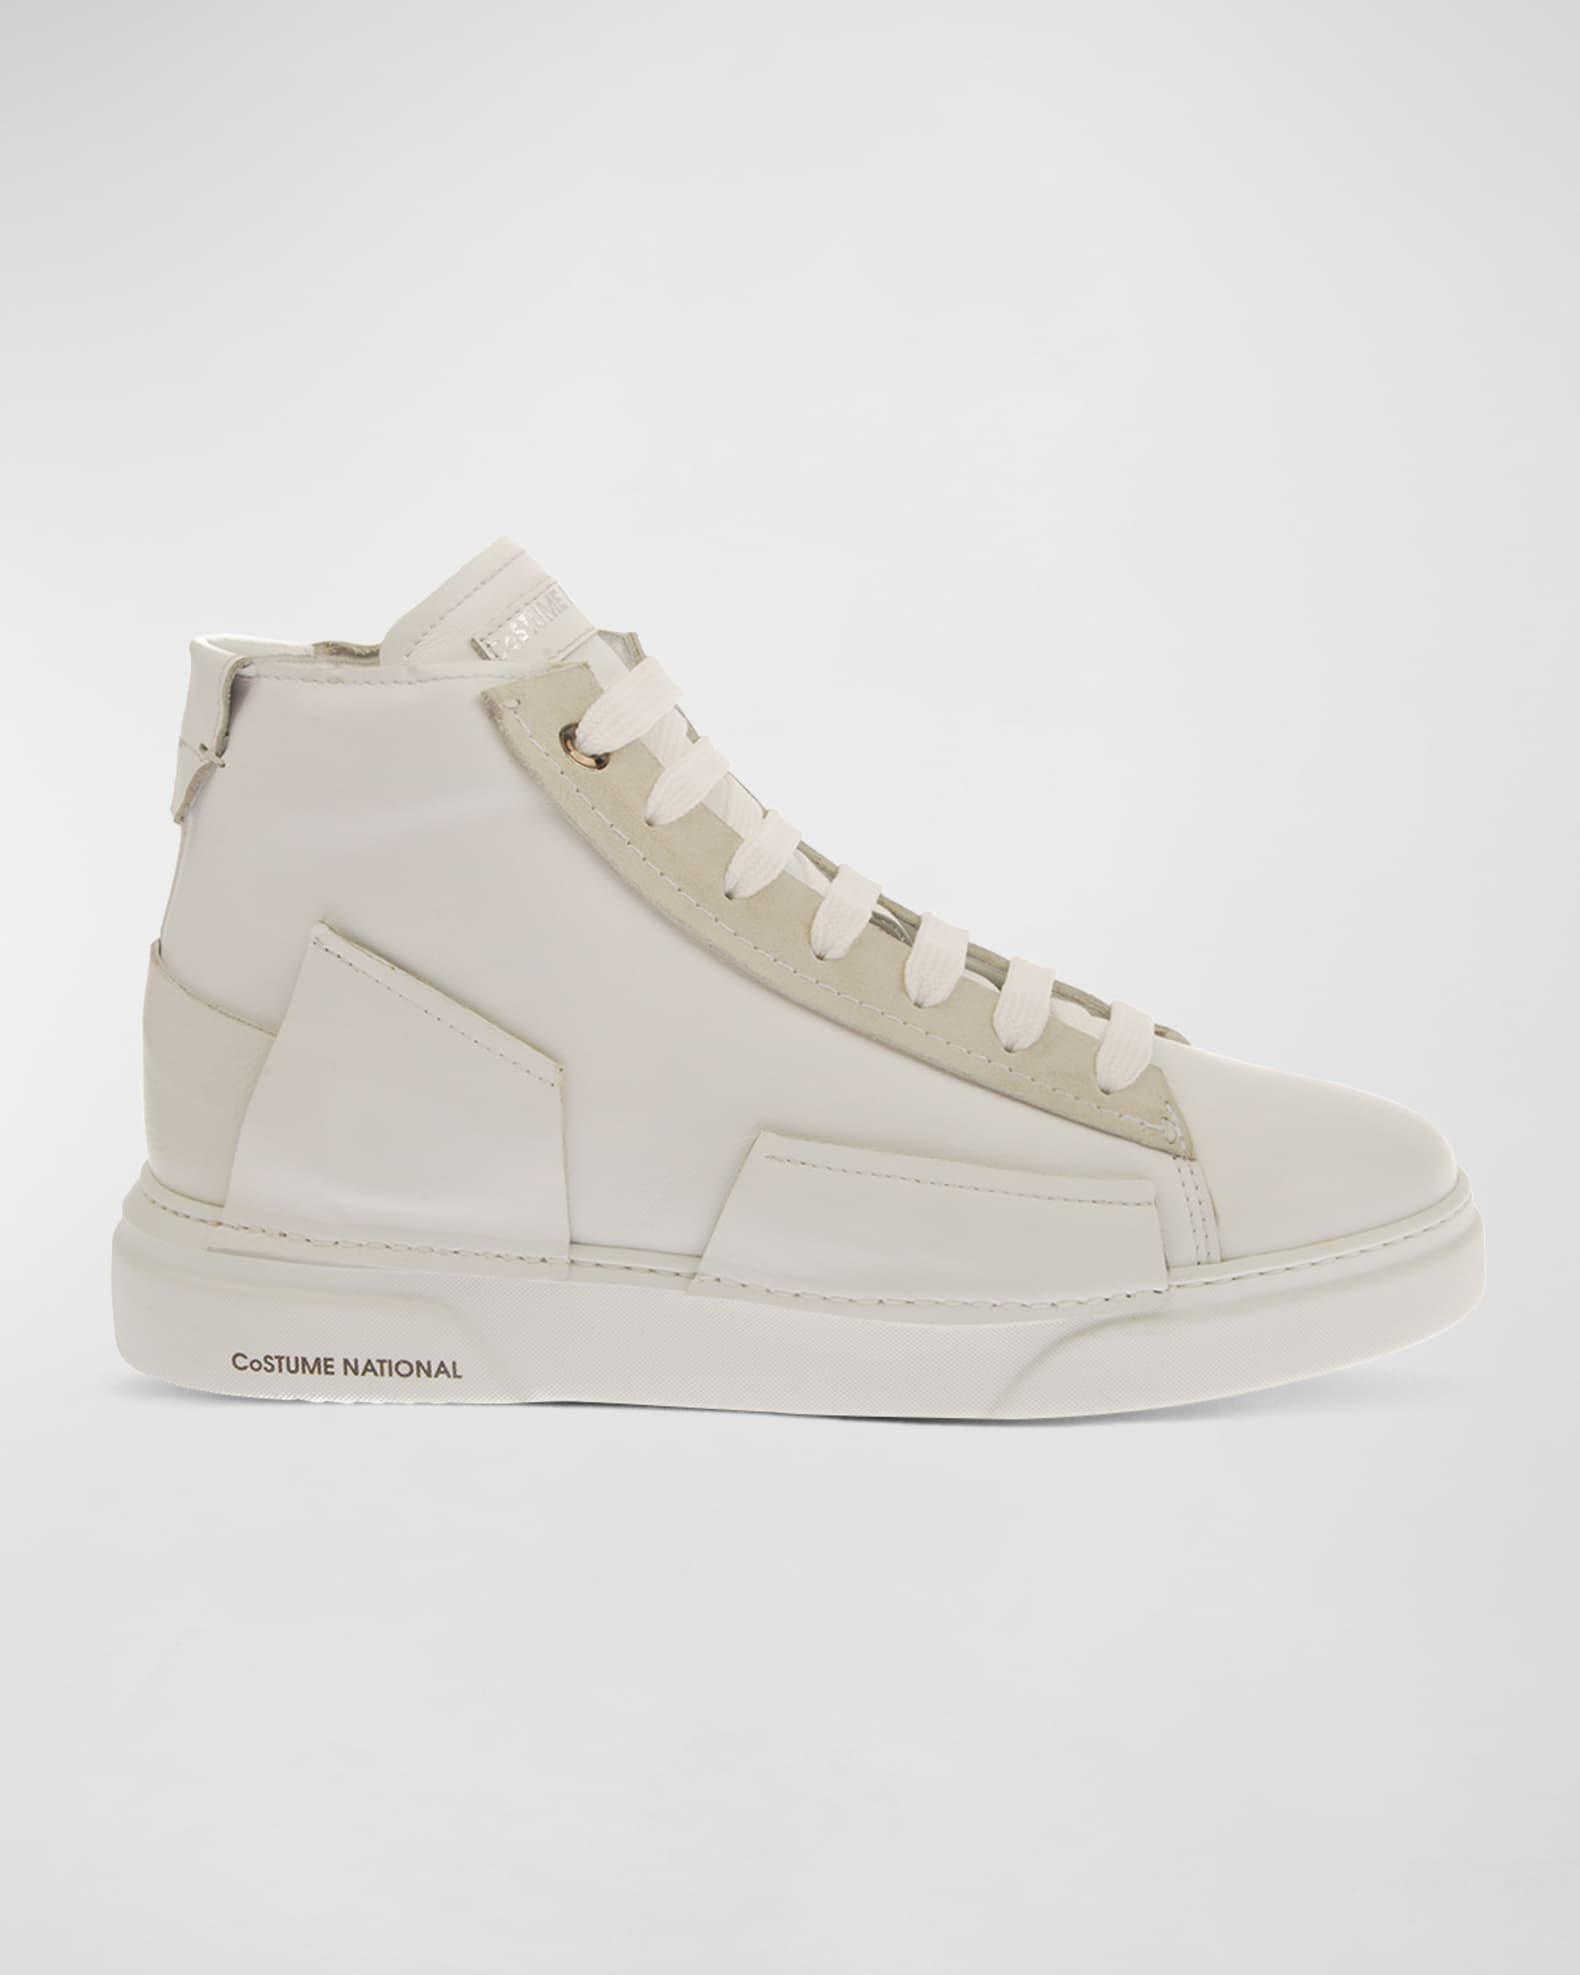 Costume National Men's Patch Suede & Leather High-Top Sneakers | Neiman ...